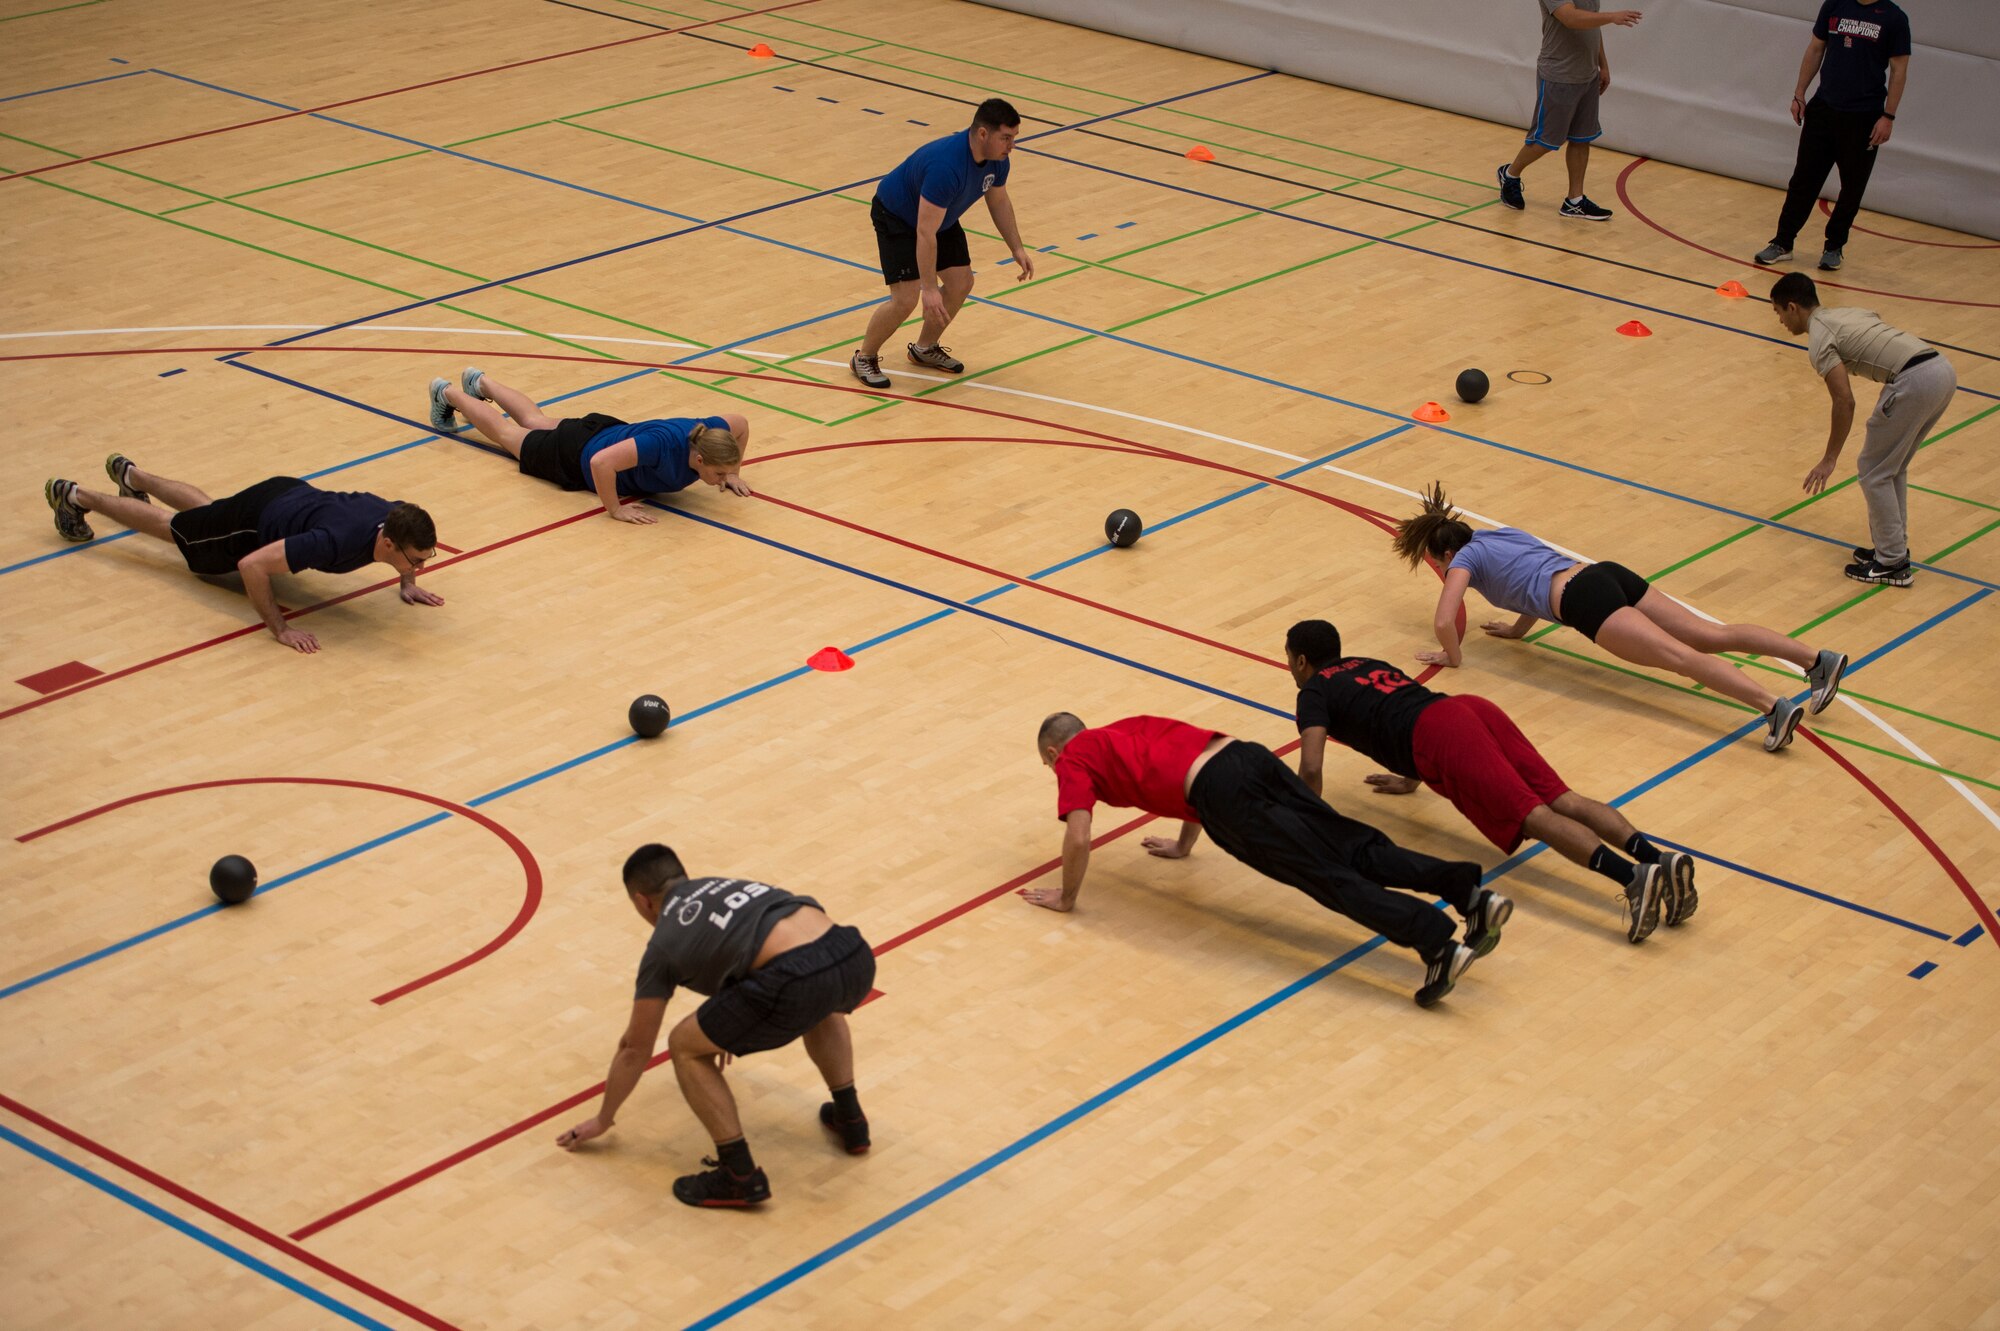 Airmen perform burpees before the start of a dodgeball game during the RUFit Dodgeball Tournament in the fitness center Dec. 11, 2015, at Spangdahlem Air Base, Germany. The combat fit-style dodgeball game had players perform multiple exercise routines if they were struck with the dodgeballs during their game. (U.S. Air Force photo by Staff Sgt. Christopher Ruano/Released)